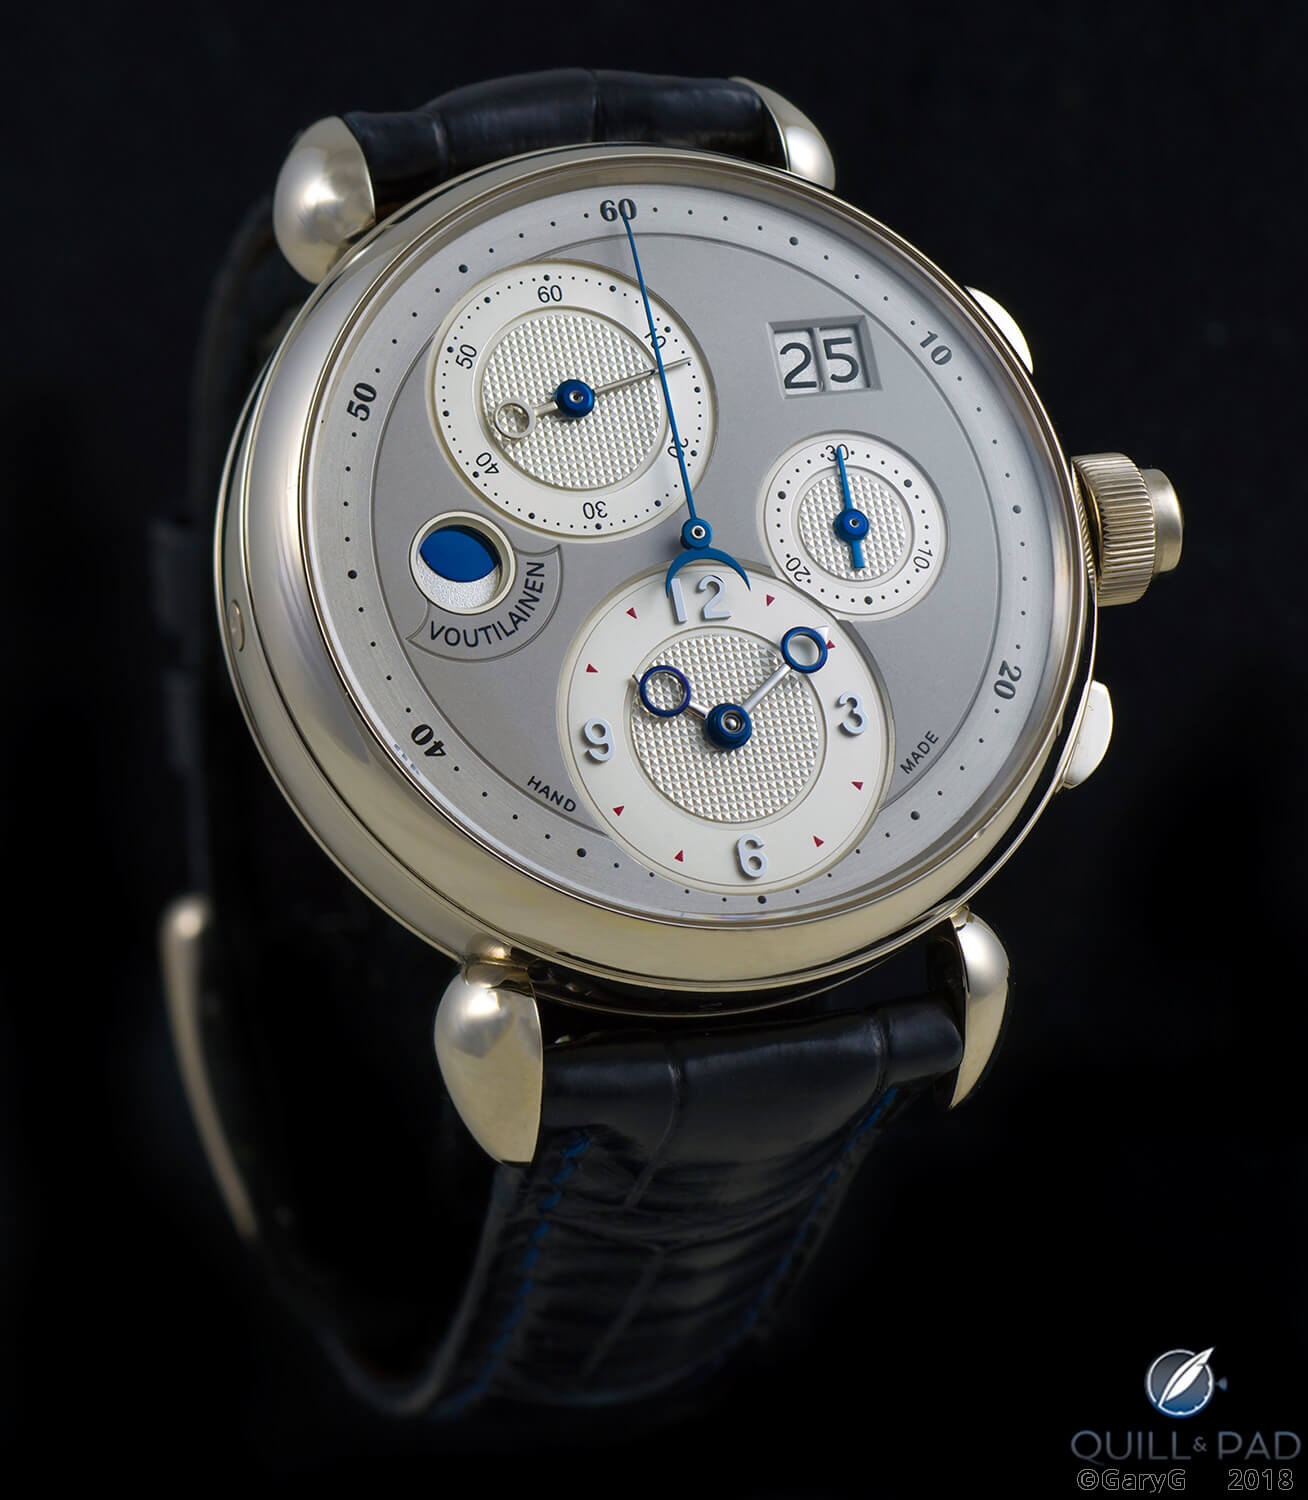 Similar, but different: dial of a unique Voutilainen chronograph in white gold